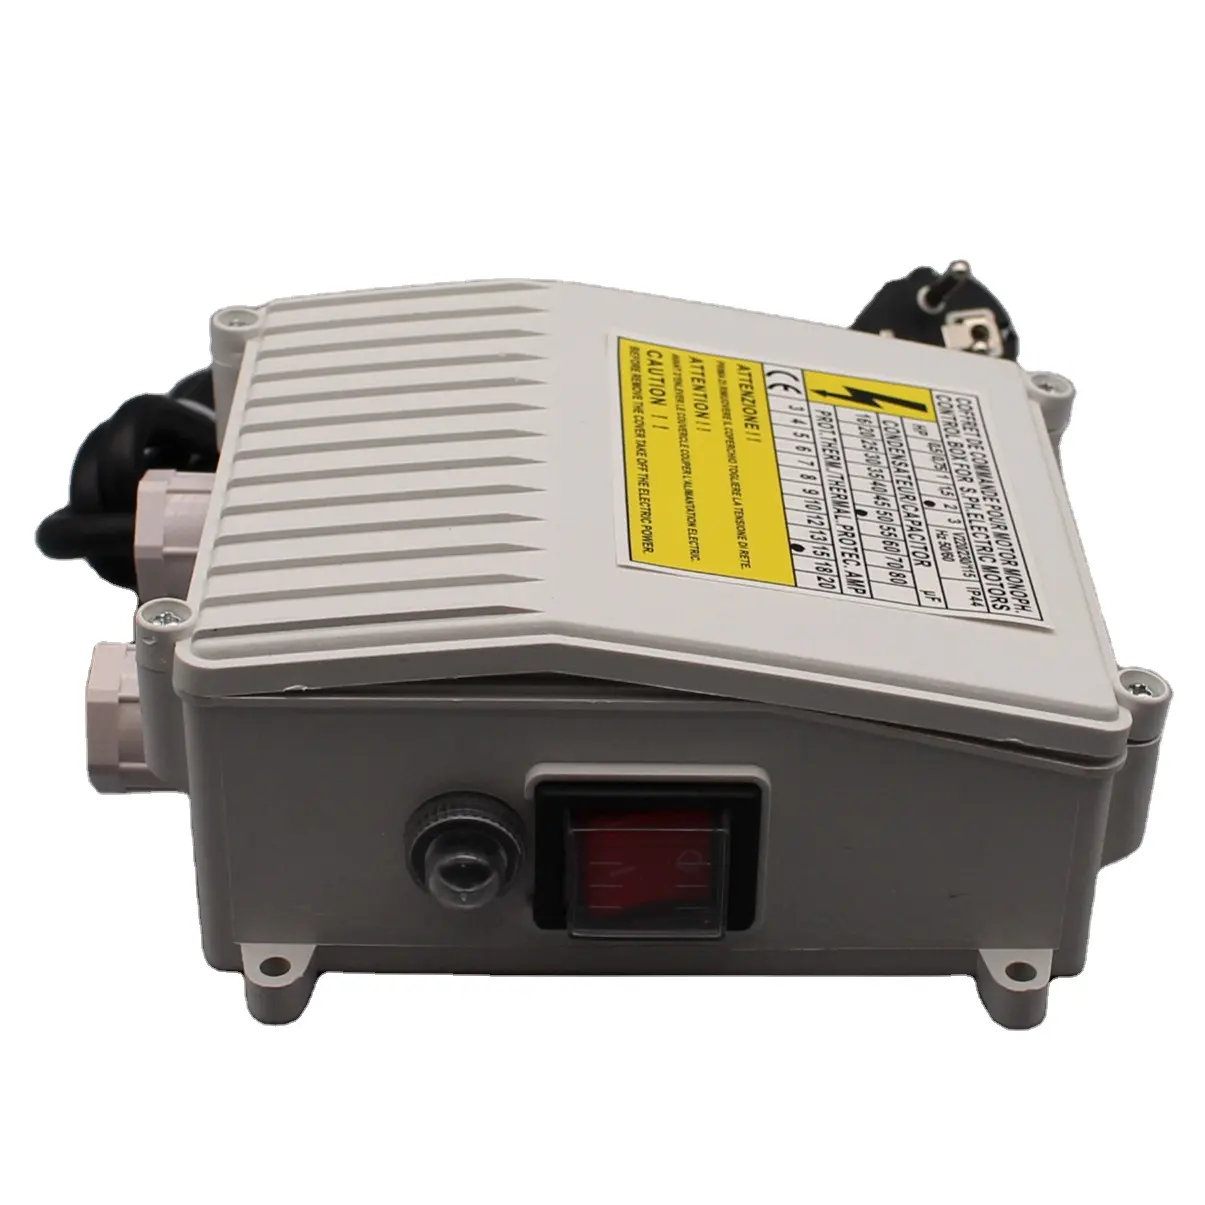 Electrical plastic control box water pump controller